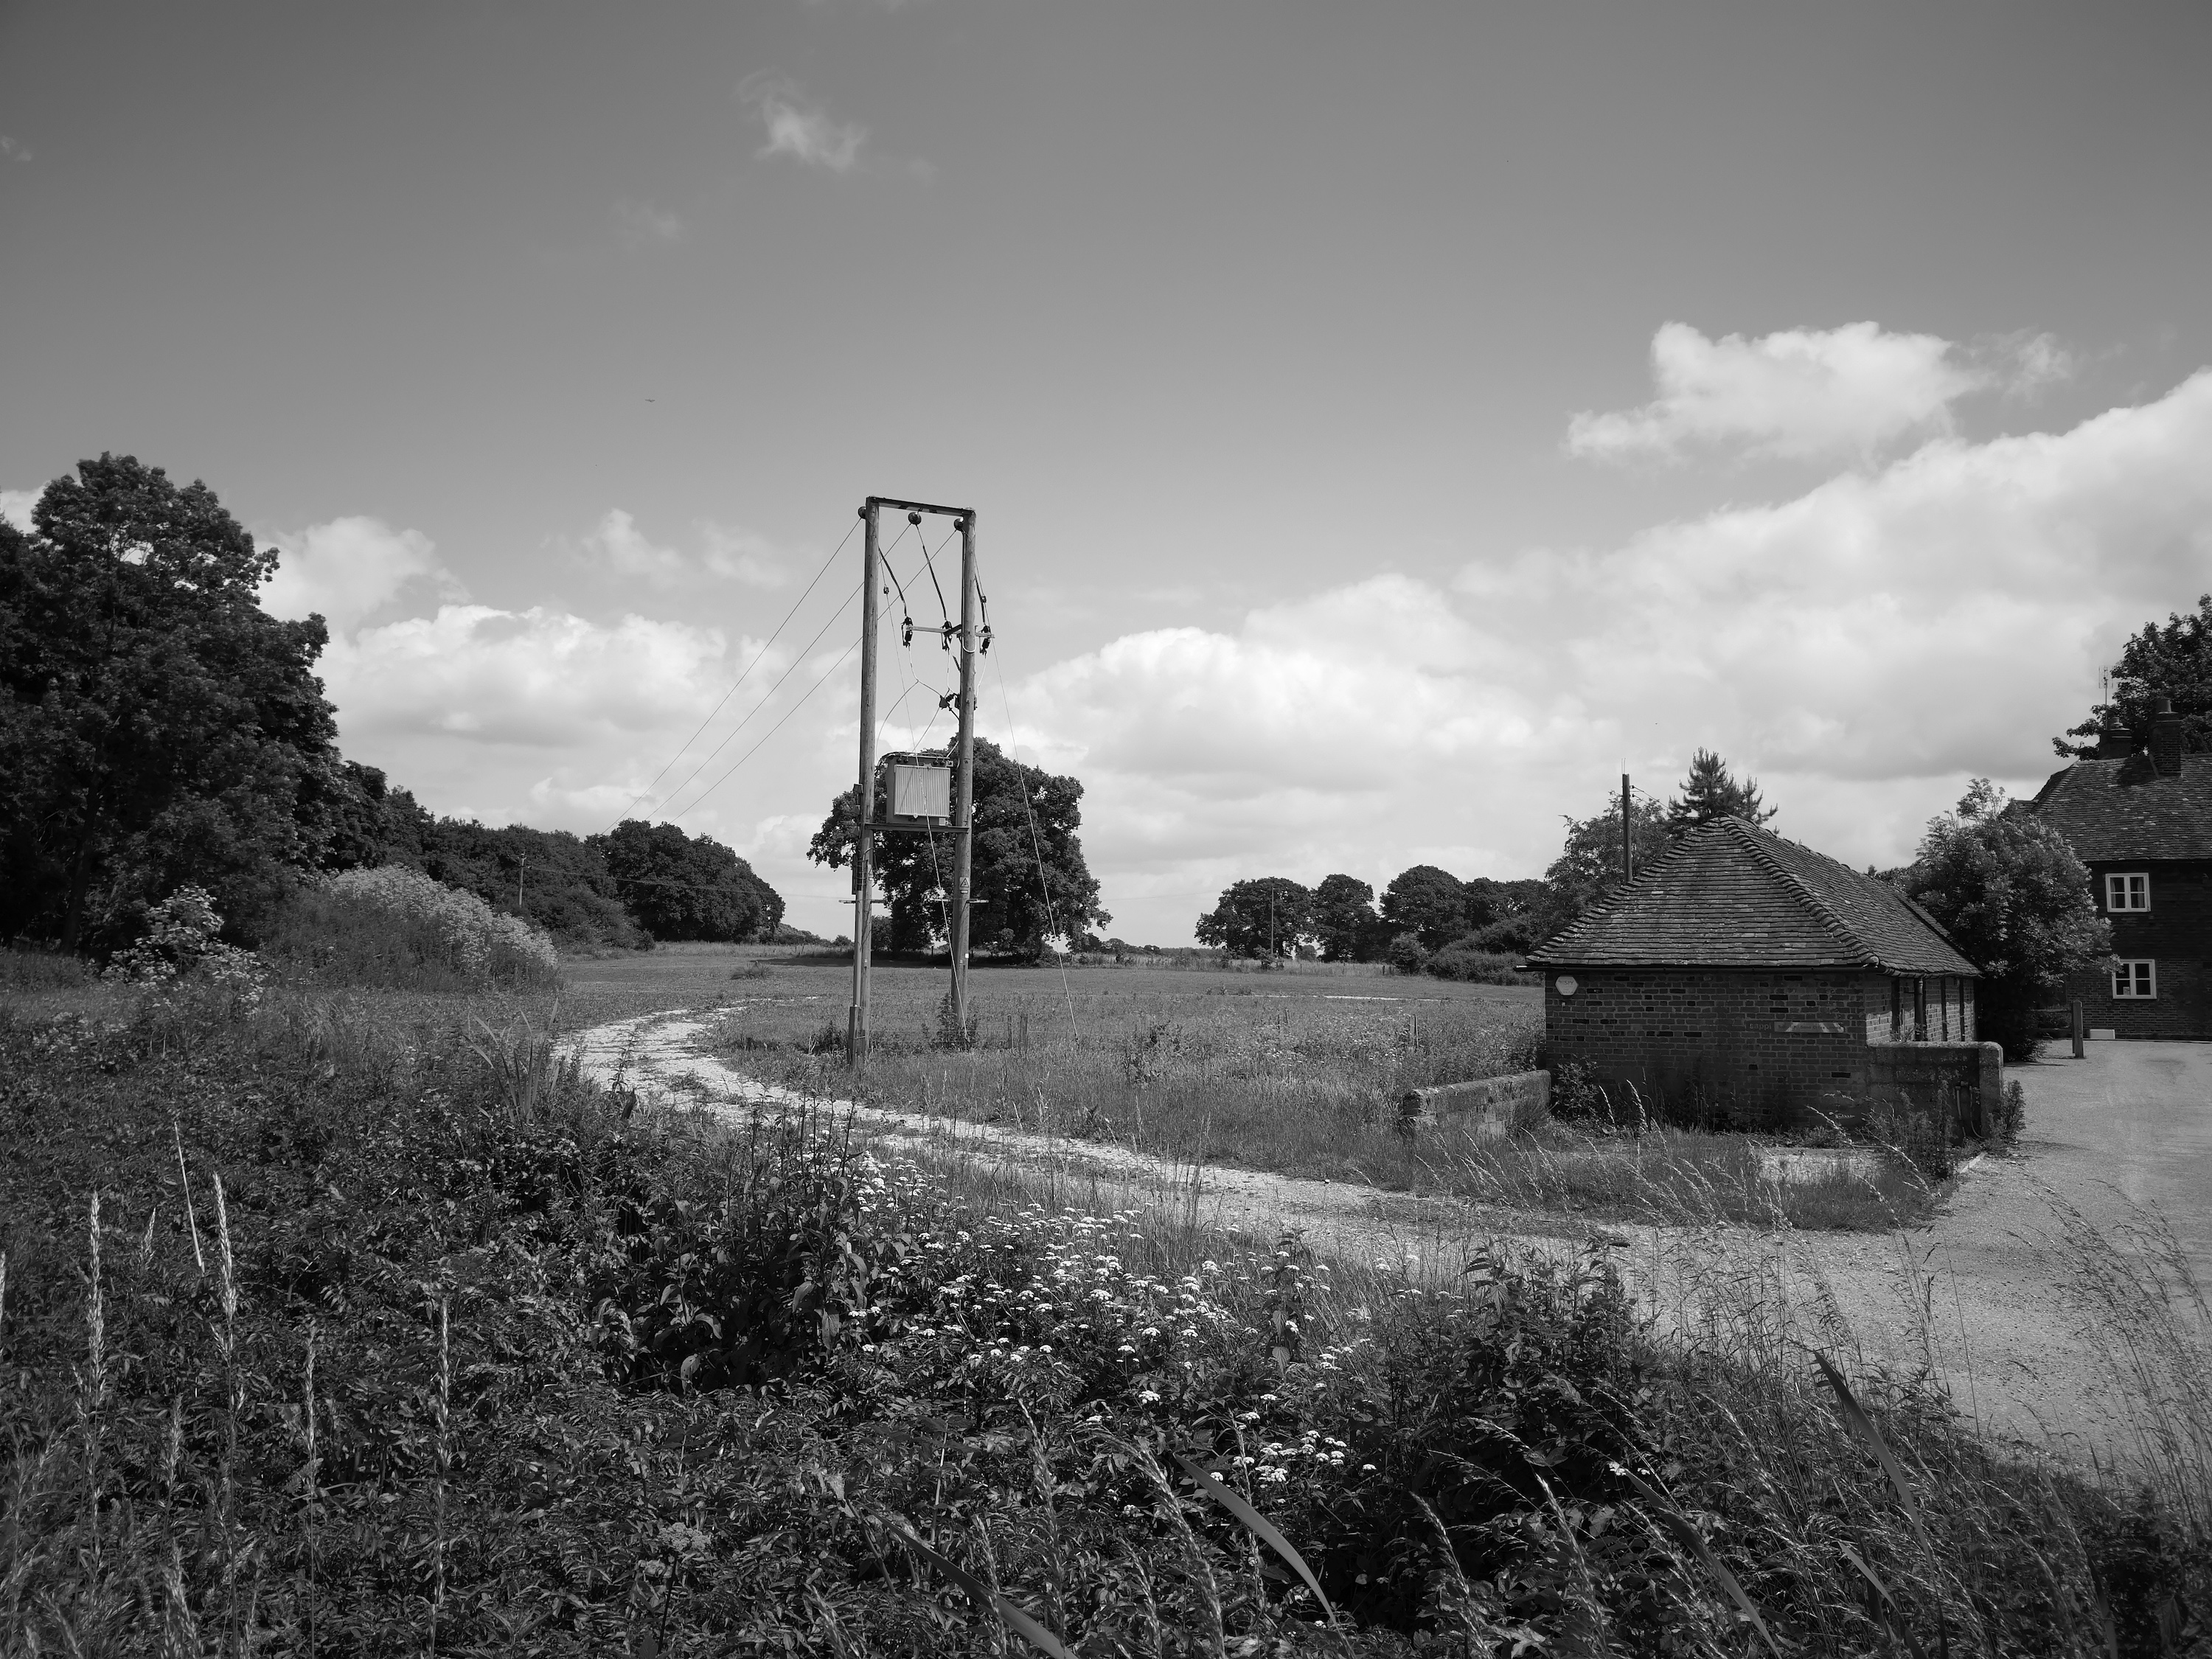 A monochrome photos of a field, taken with the Huawei P20 Pro.